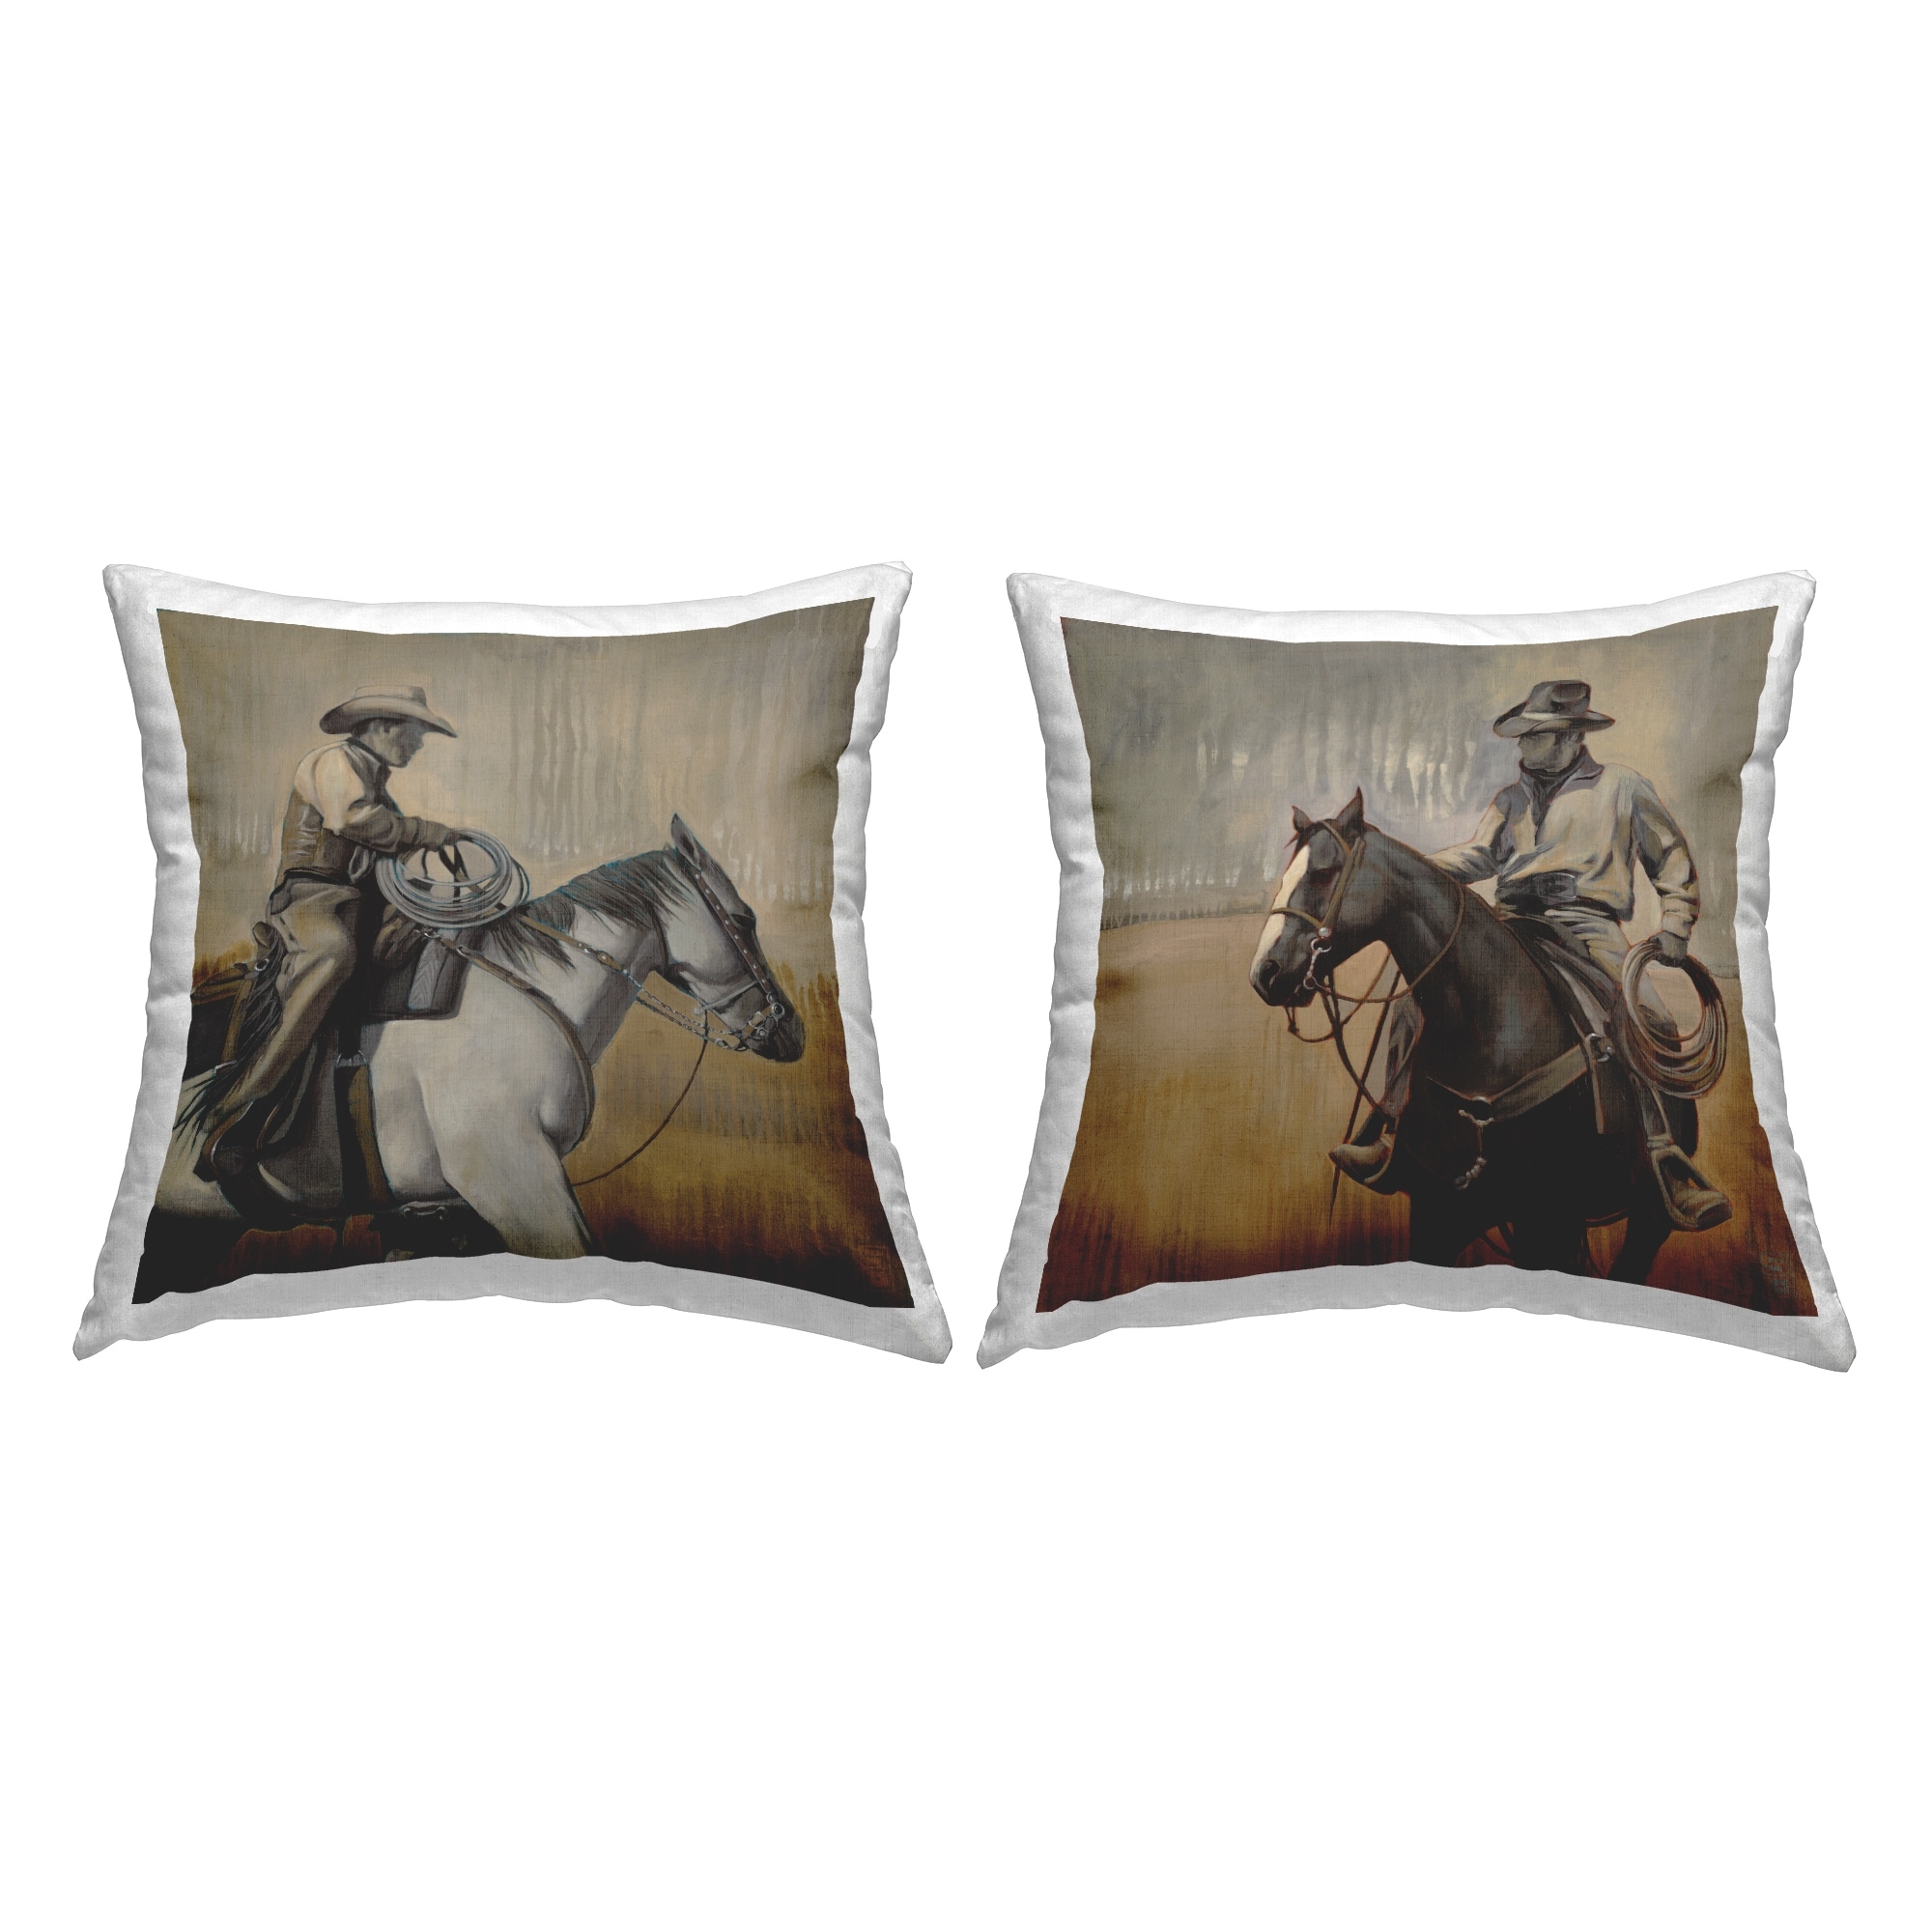 https://ak1.ostkcdn.com/images/products/is/images/direct/09d7c449309acfff32af8777cb5be20df244b920/Stupell-Industries-Western-Cowboys-Rustic-Scene-Printed-Throw-Pillow-Design-by-Stacy-Daguiar-%28Set-of-2%29.jpg